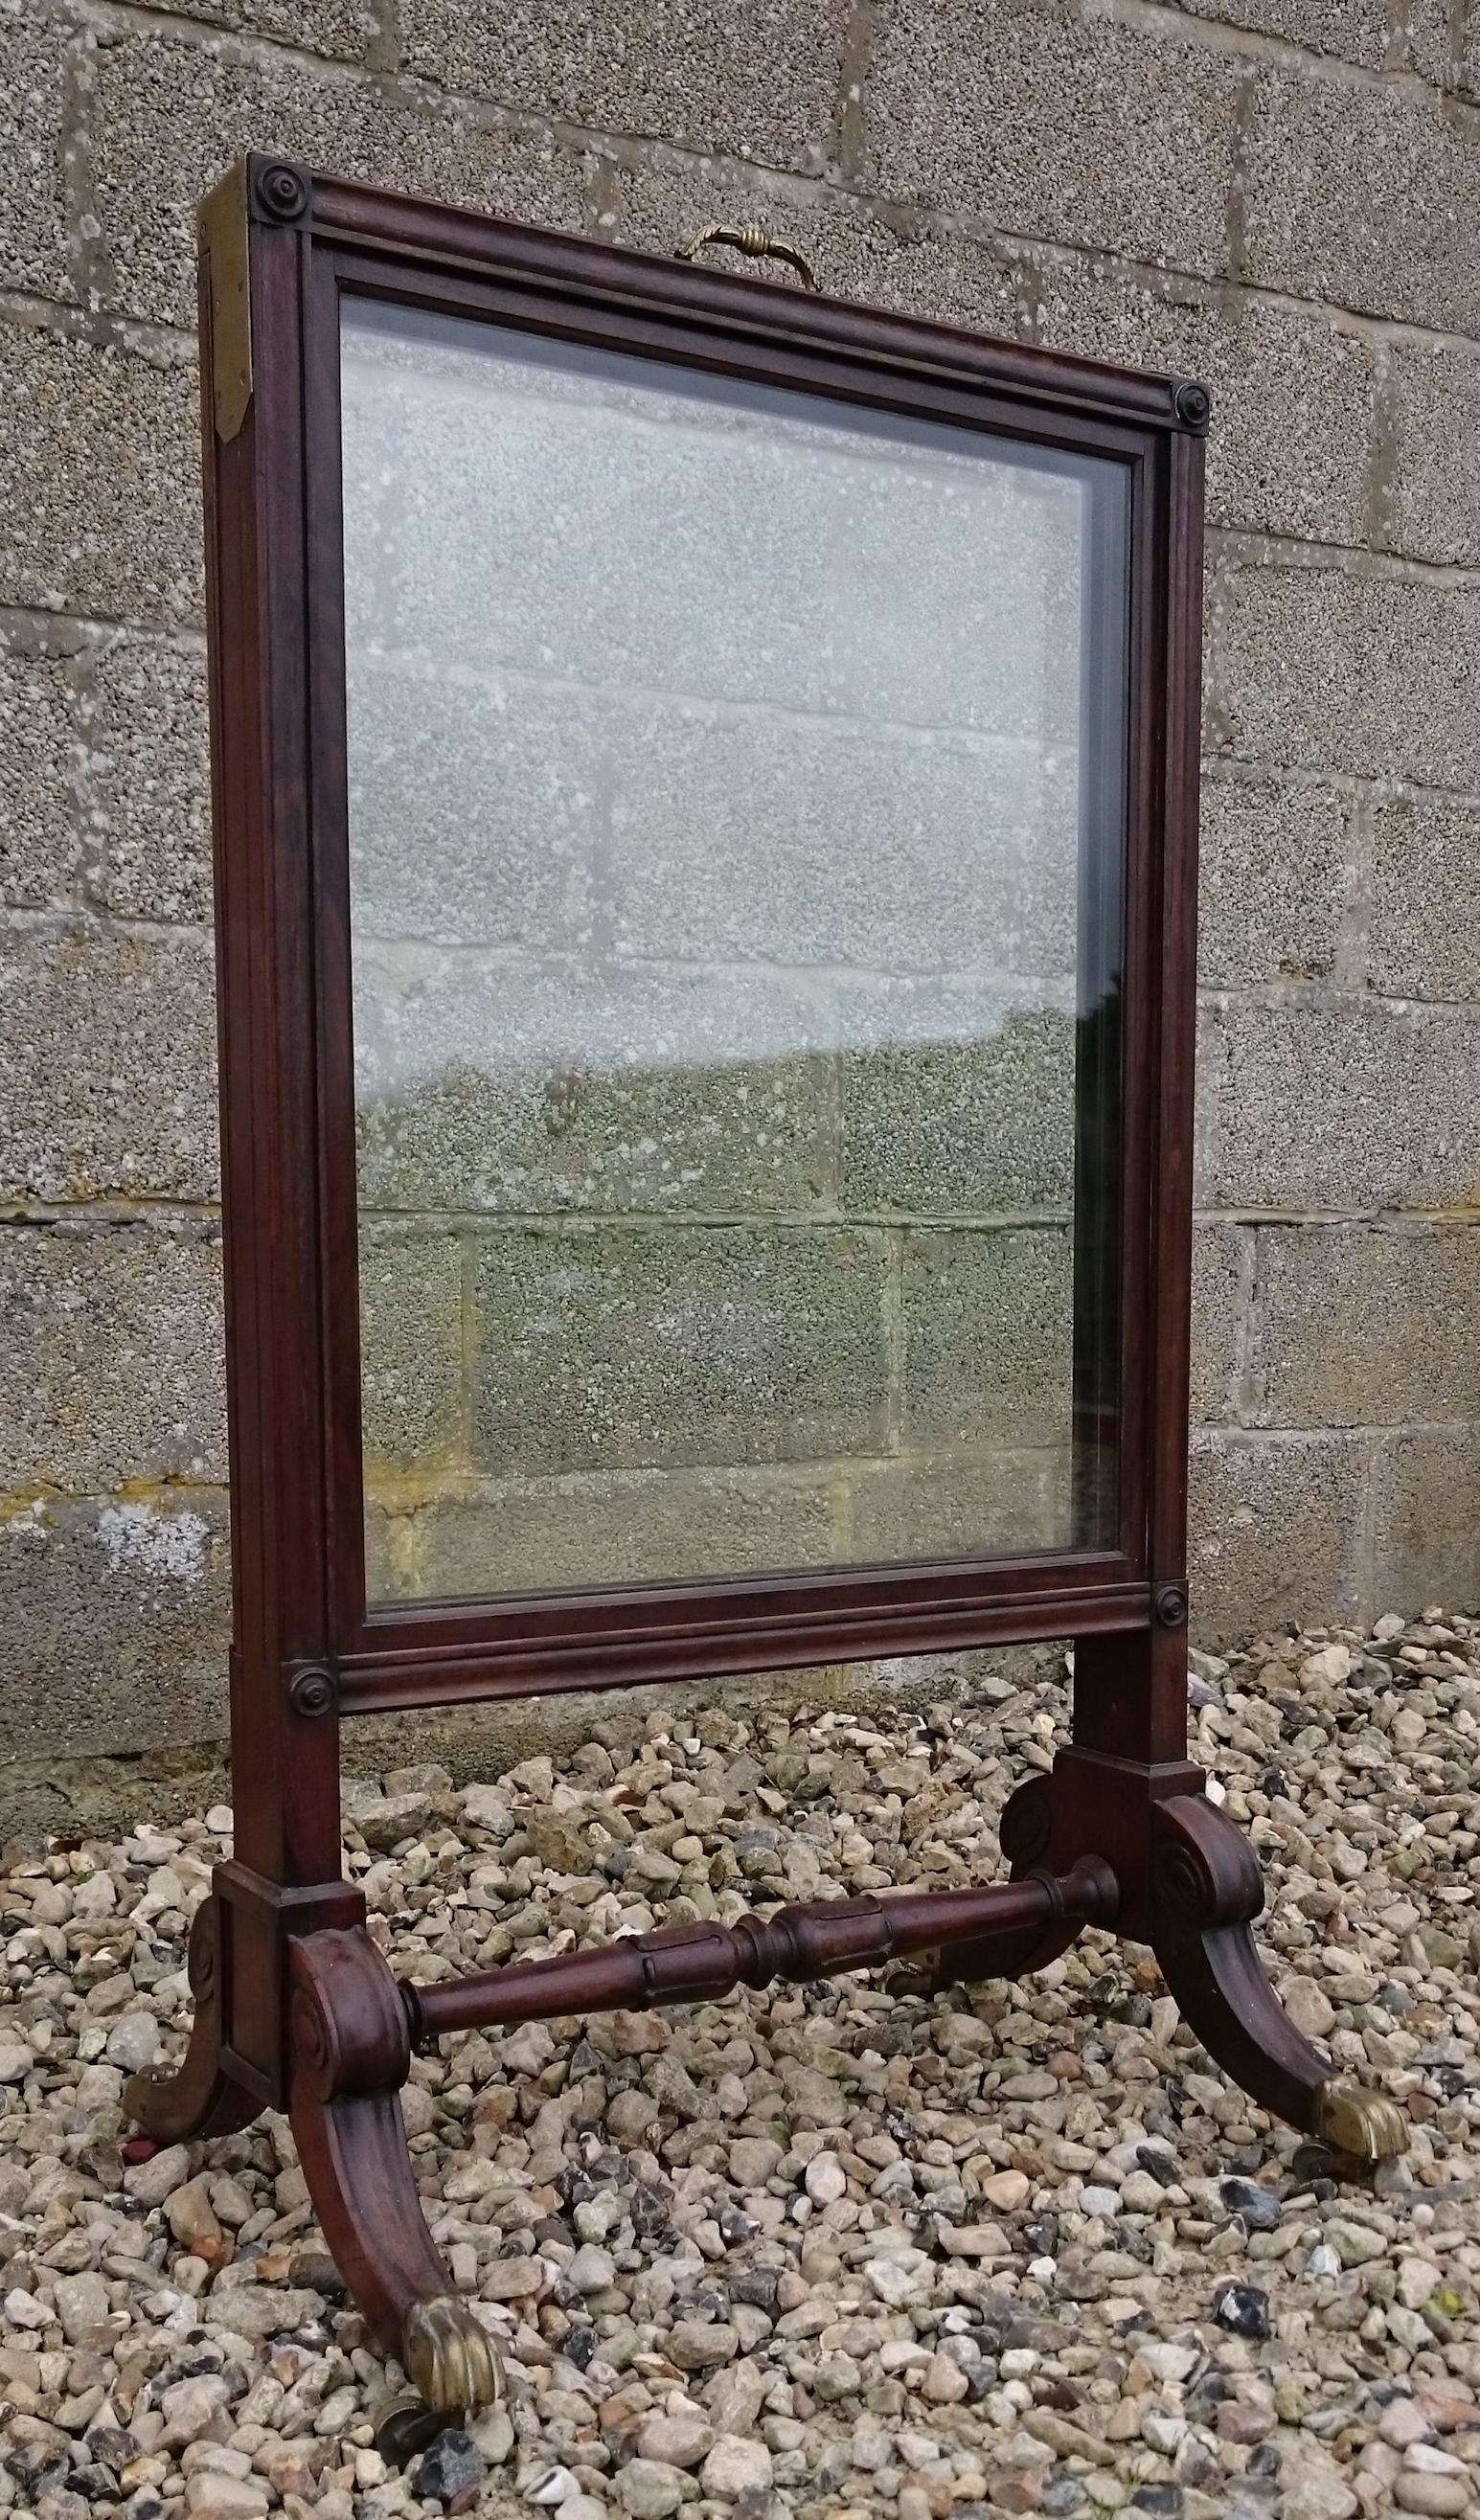 Unusual antique fire screen comprising of three glass sections, two of which slide out from the centre section. The end support with central bar format is pleasing to the eye. The mahogany is very fine quality and the decoration is finely carved.